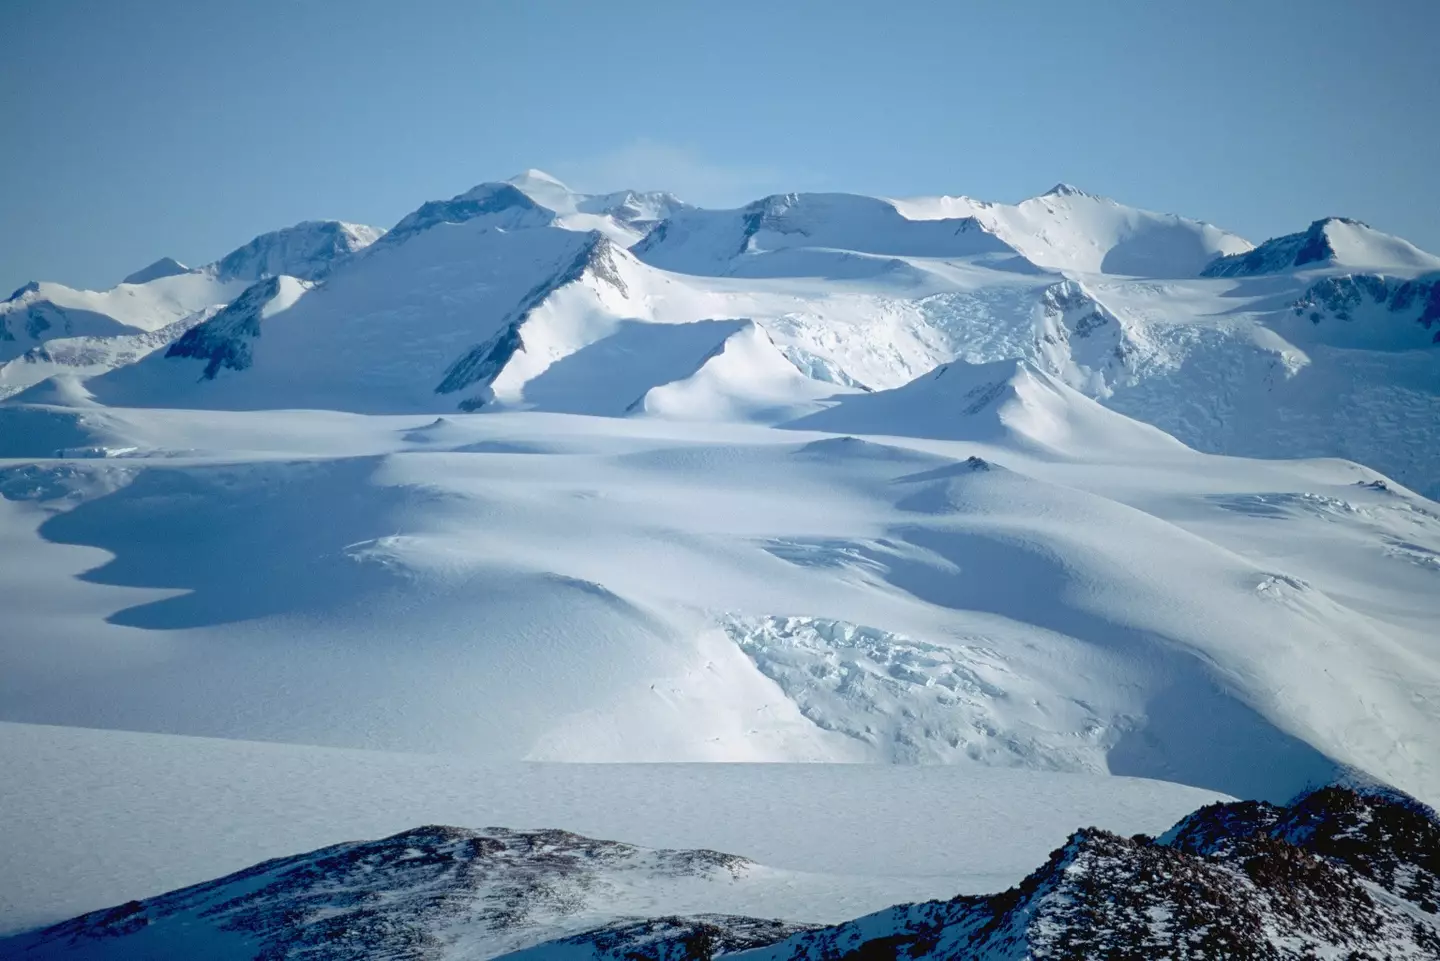 Scientists have discovered an ancient lost landscape under Antarctica.